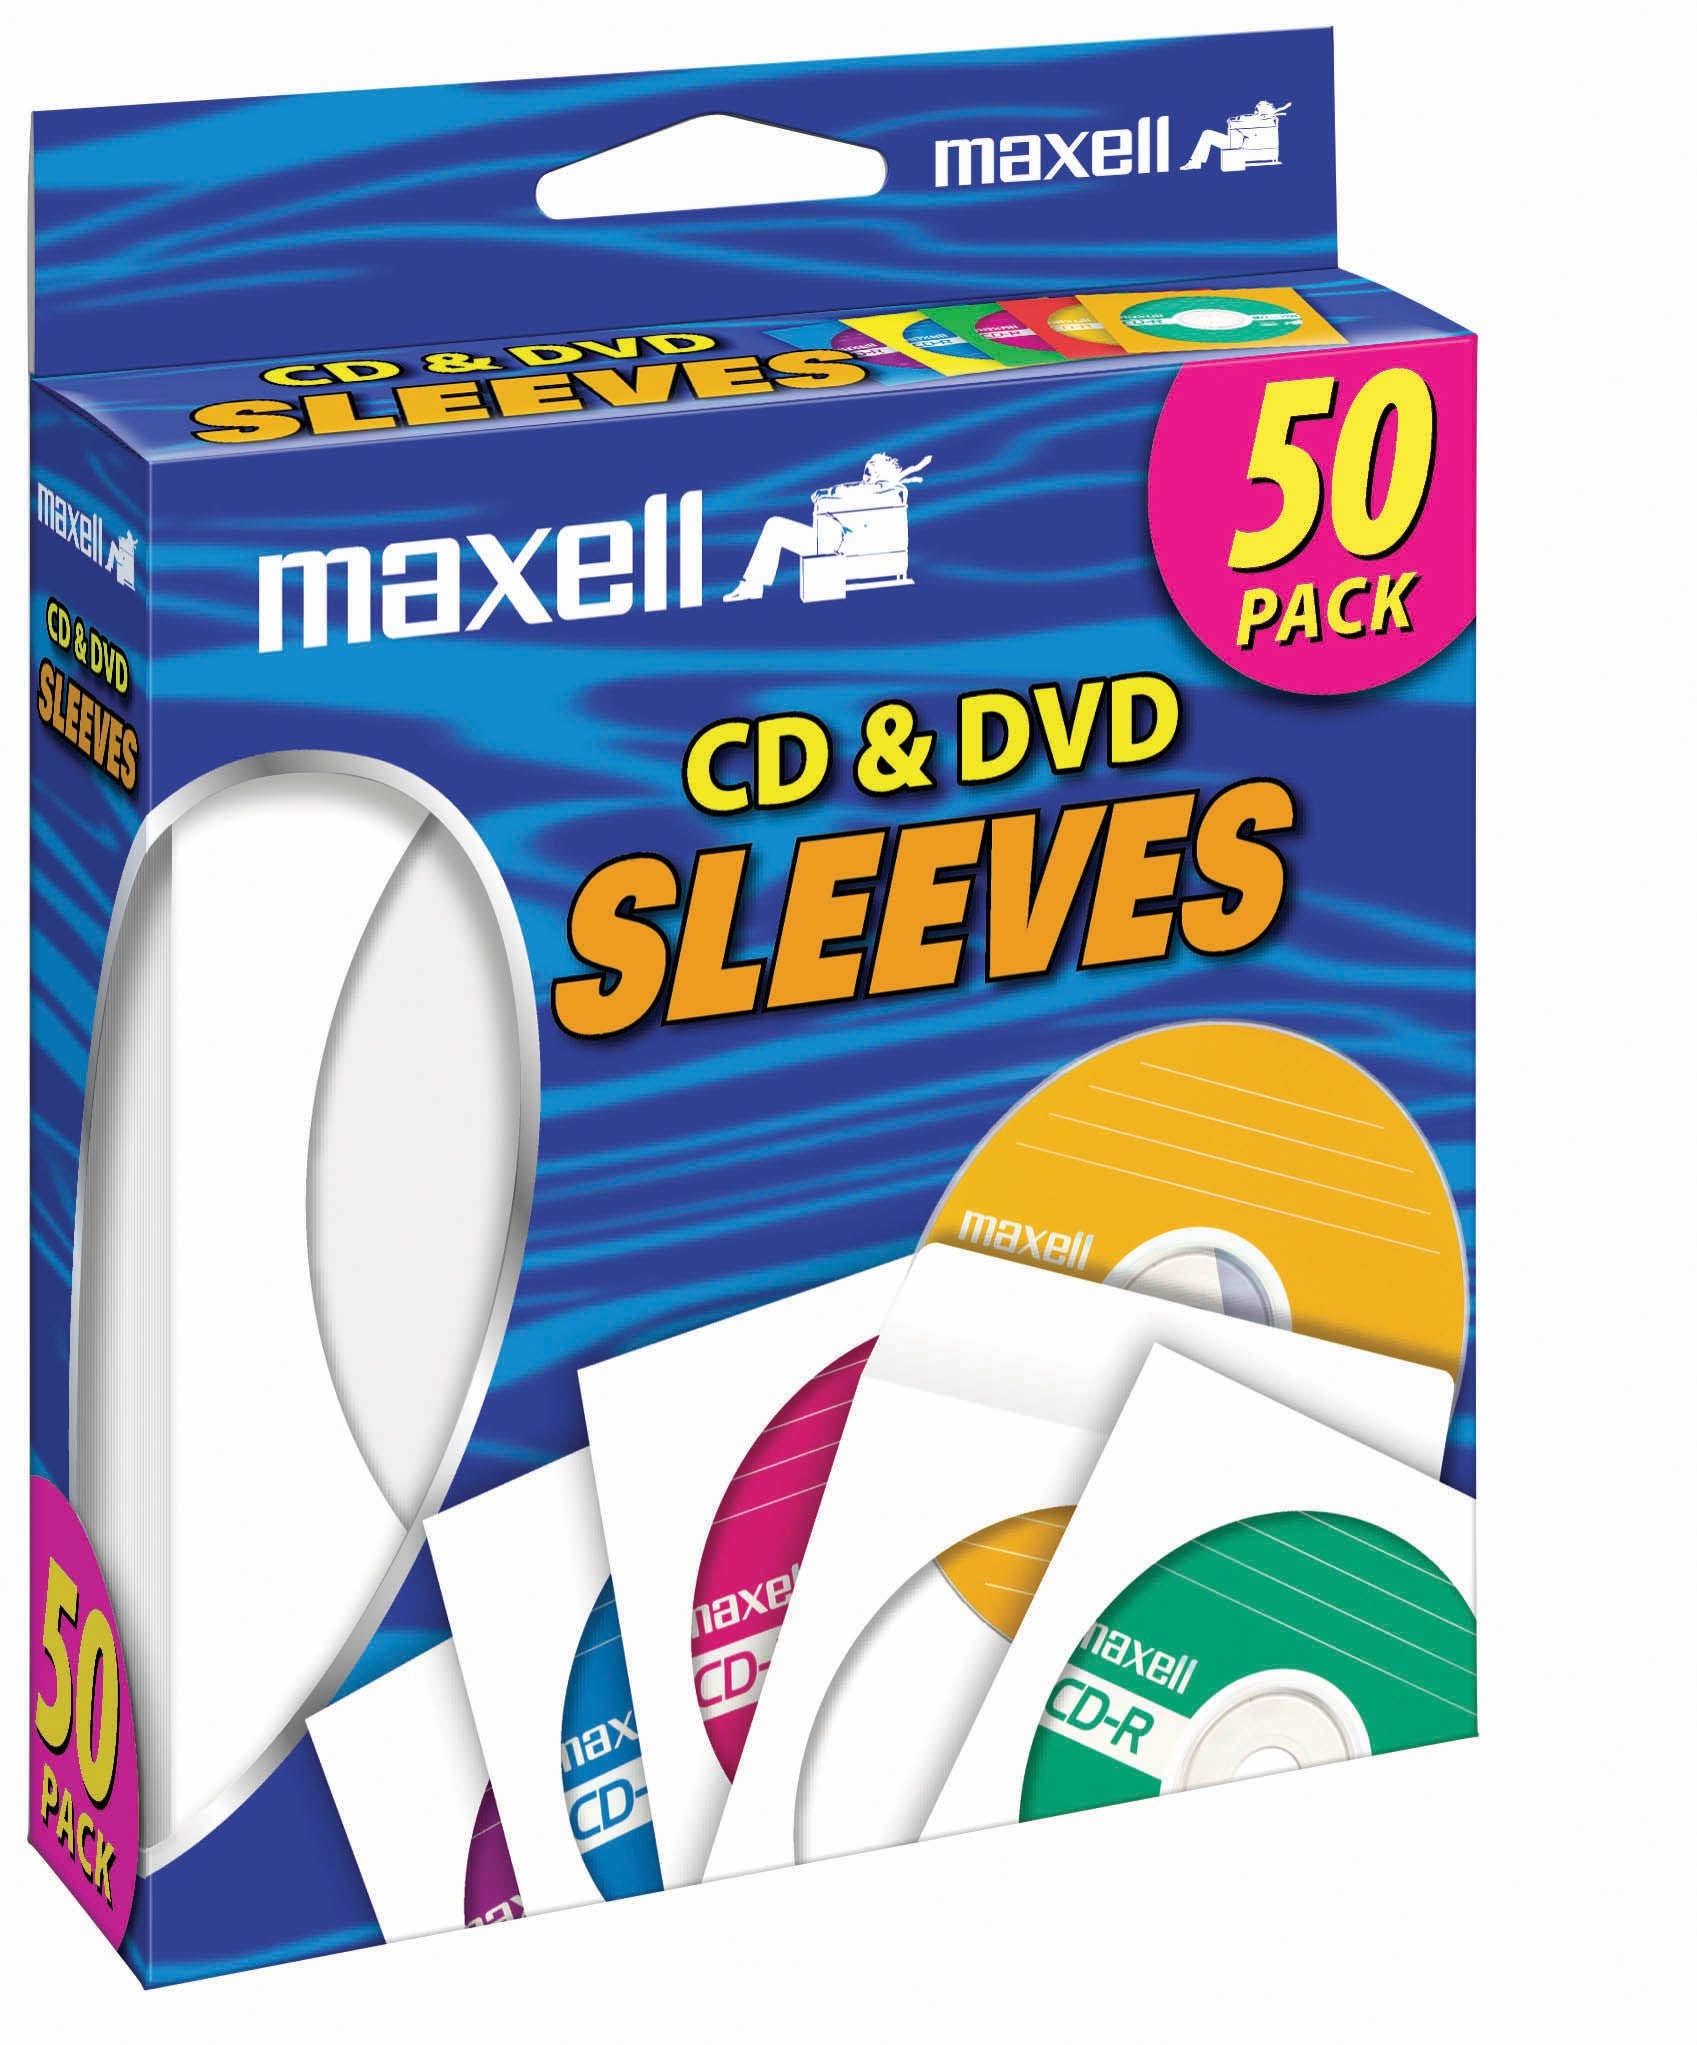 Maxell, Maxell 190135 Cd400 50 Pack Cd Sleeves